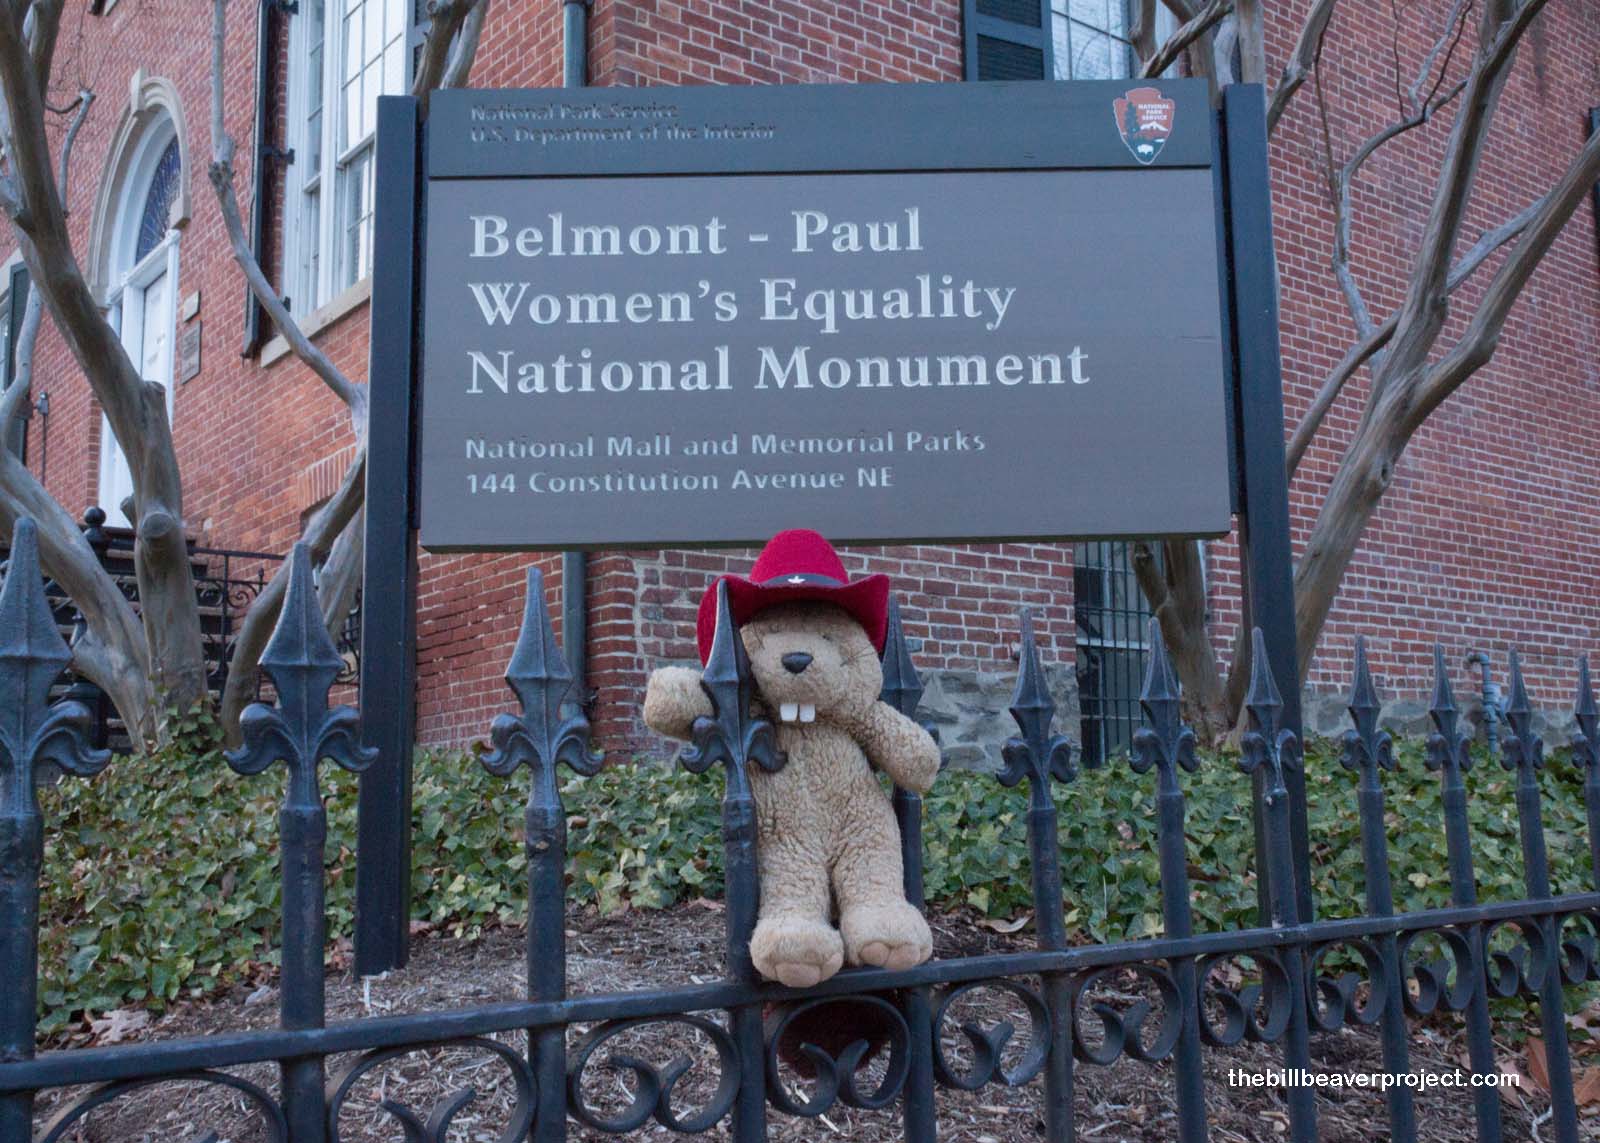 Belmont-Paul Women's Equality National Monument